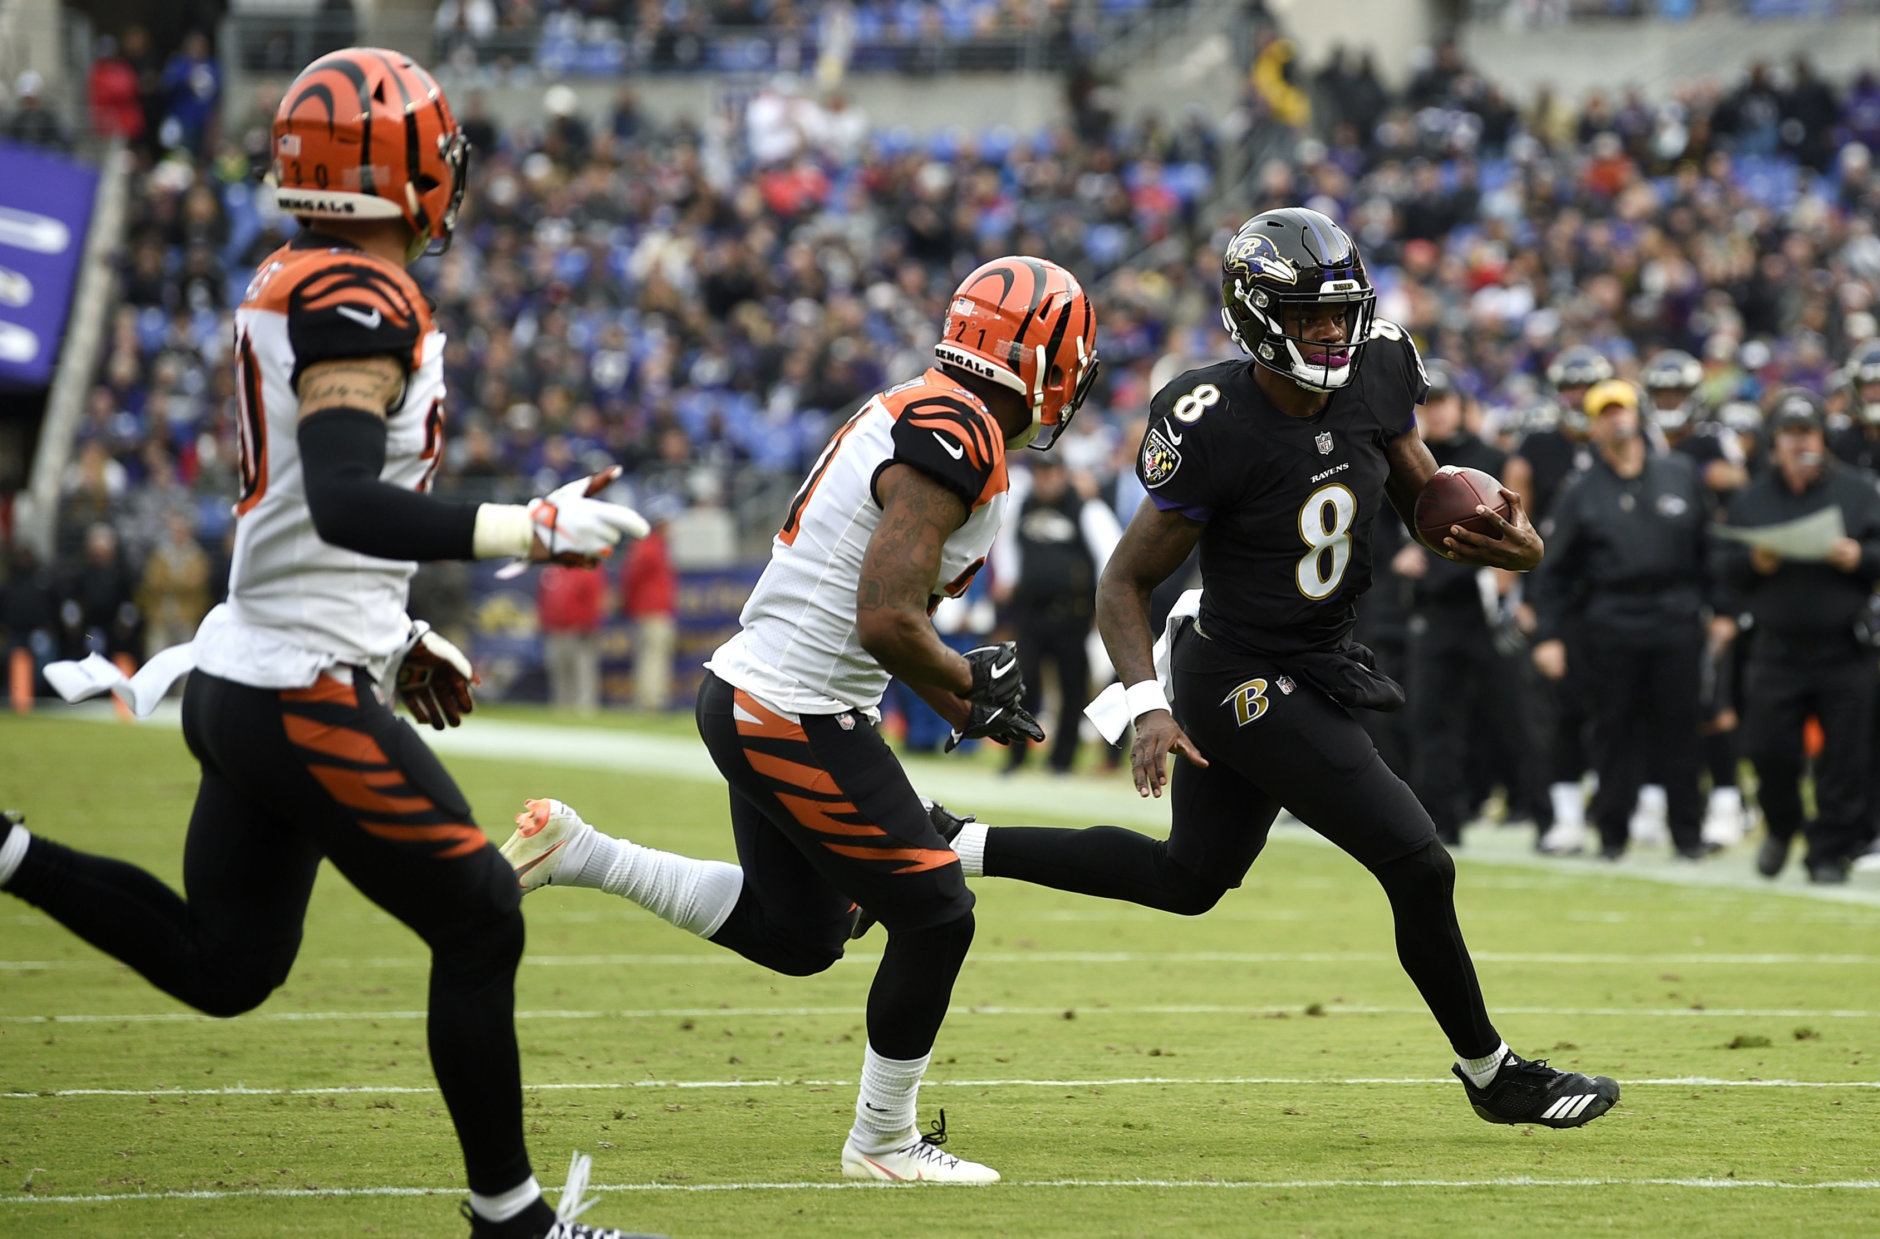 Baltimore Ravens quarterback Lamar Jackson (8) rushes the ball against Cincinnati Bengals defensive back Darqueze Dennard, center, and free safety Jessie Bates in the first half of an NFL football game, Sunday, Nov. 18, 2018, in Baltimore. (AP Photo/Nick Wass)